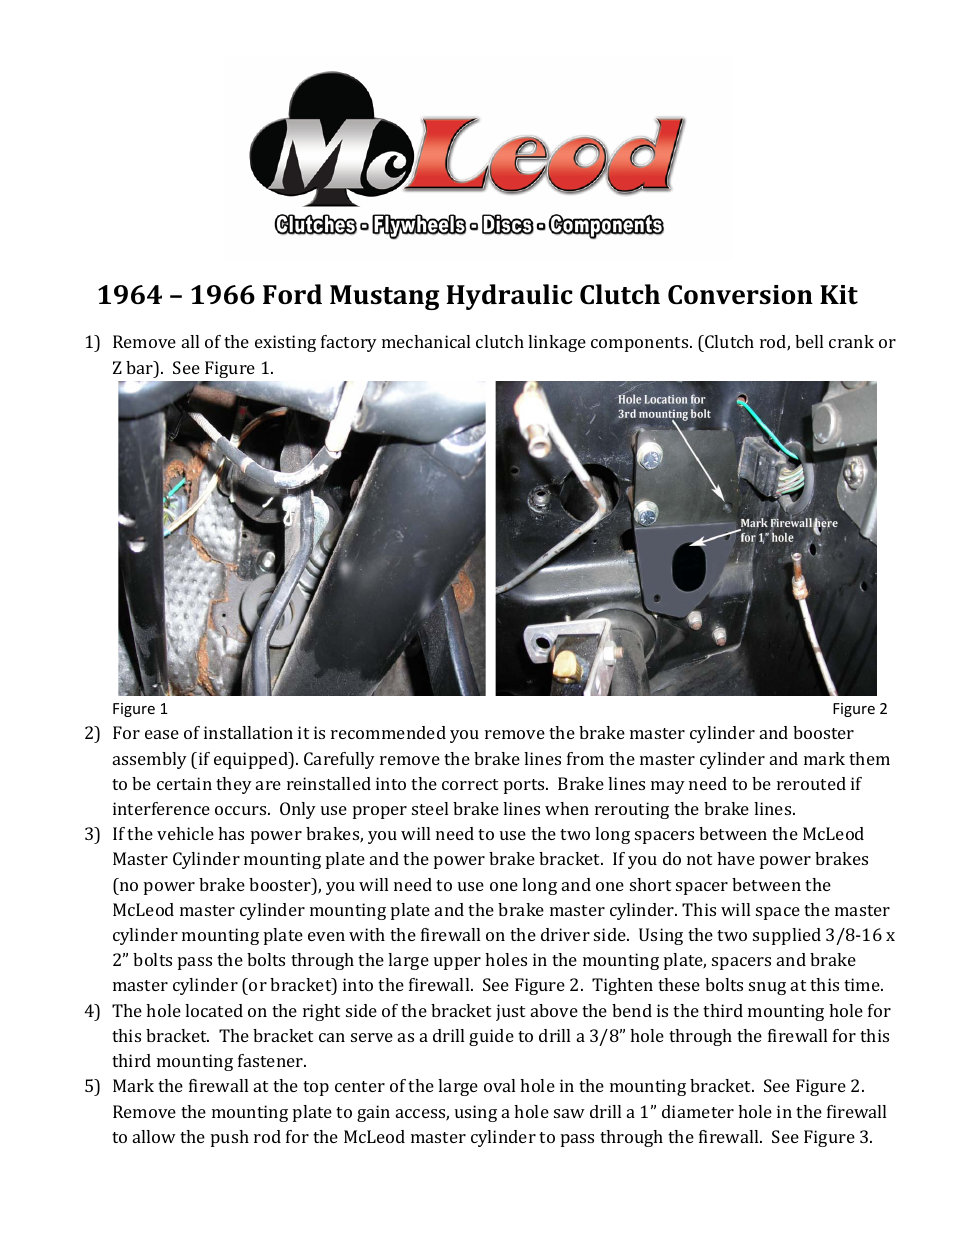 1964-66 Mustang Hydraulic Conversion Instructions